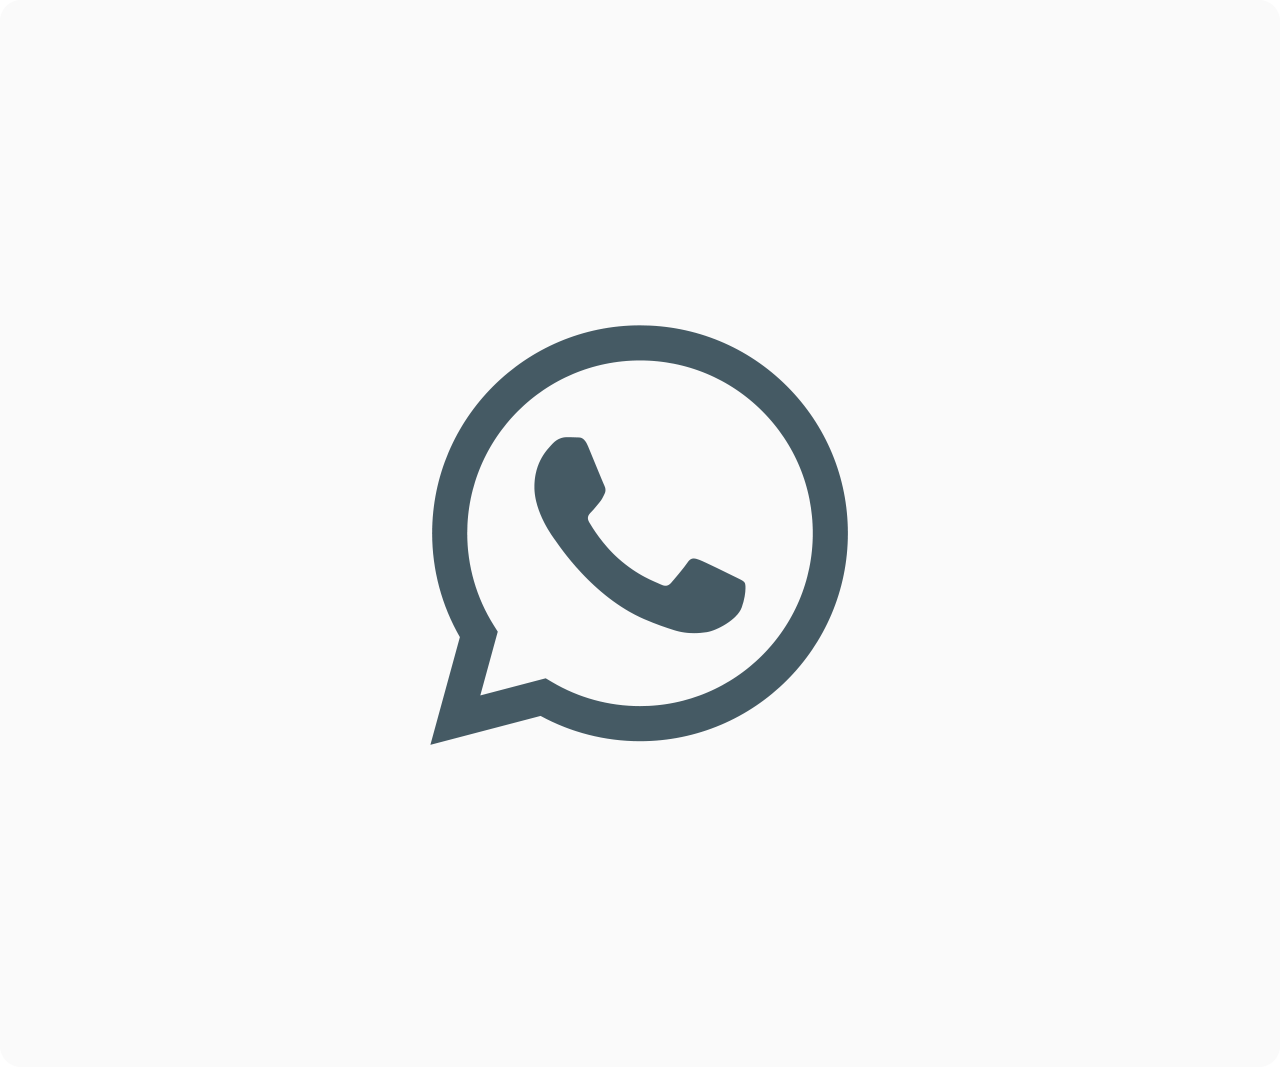 Red Word Bubble Logo - WhatsApp Brand Resources